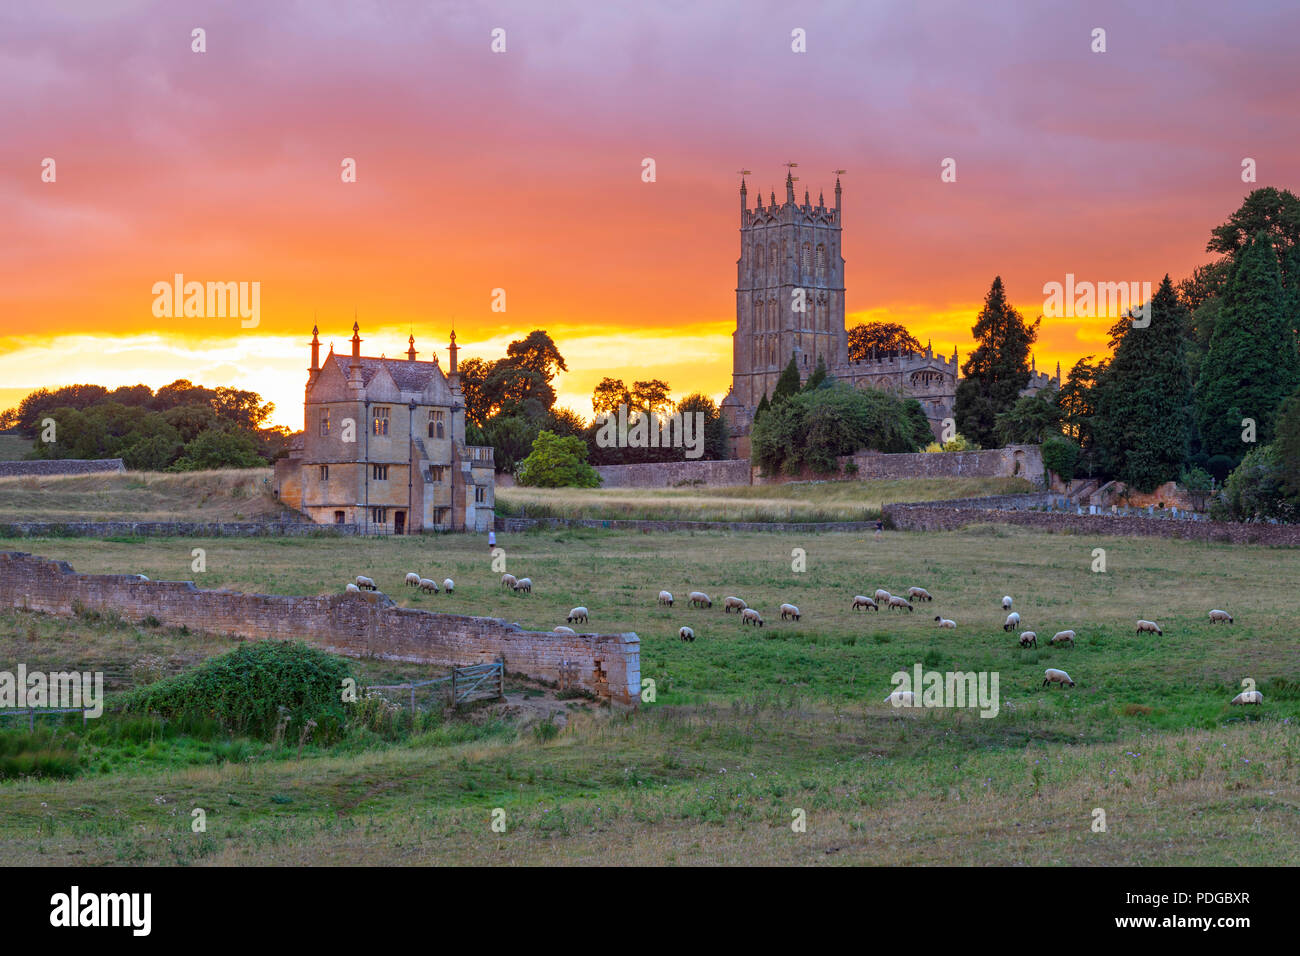 East Banqueting House of Old Campden House and St James' church in the coneygree field at sunset, Chipping Campden, Cotswolds, Gloucestershire Stock Photo